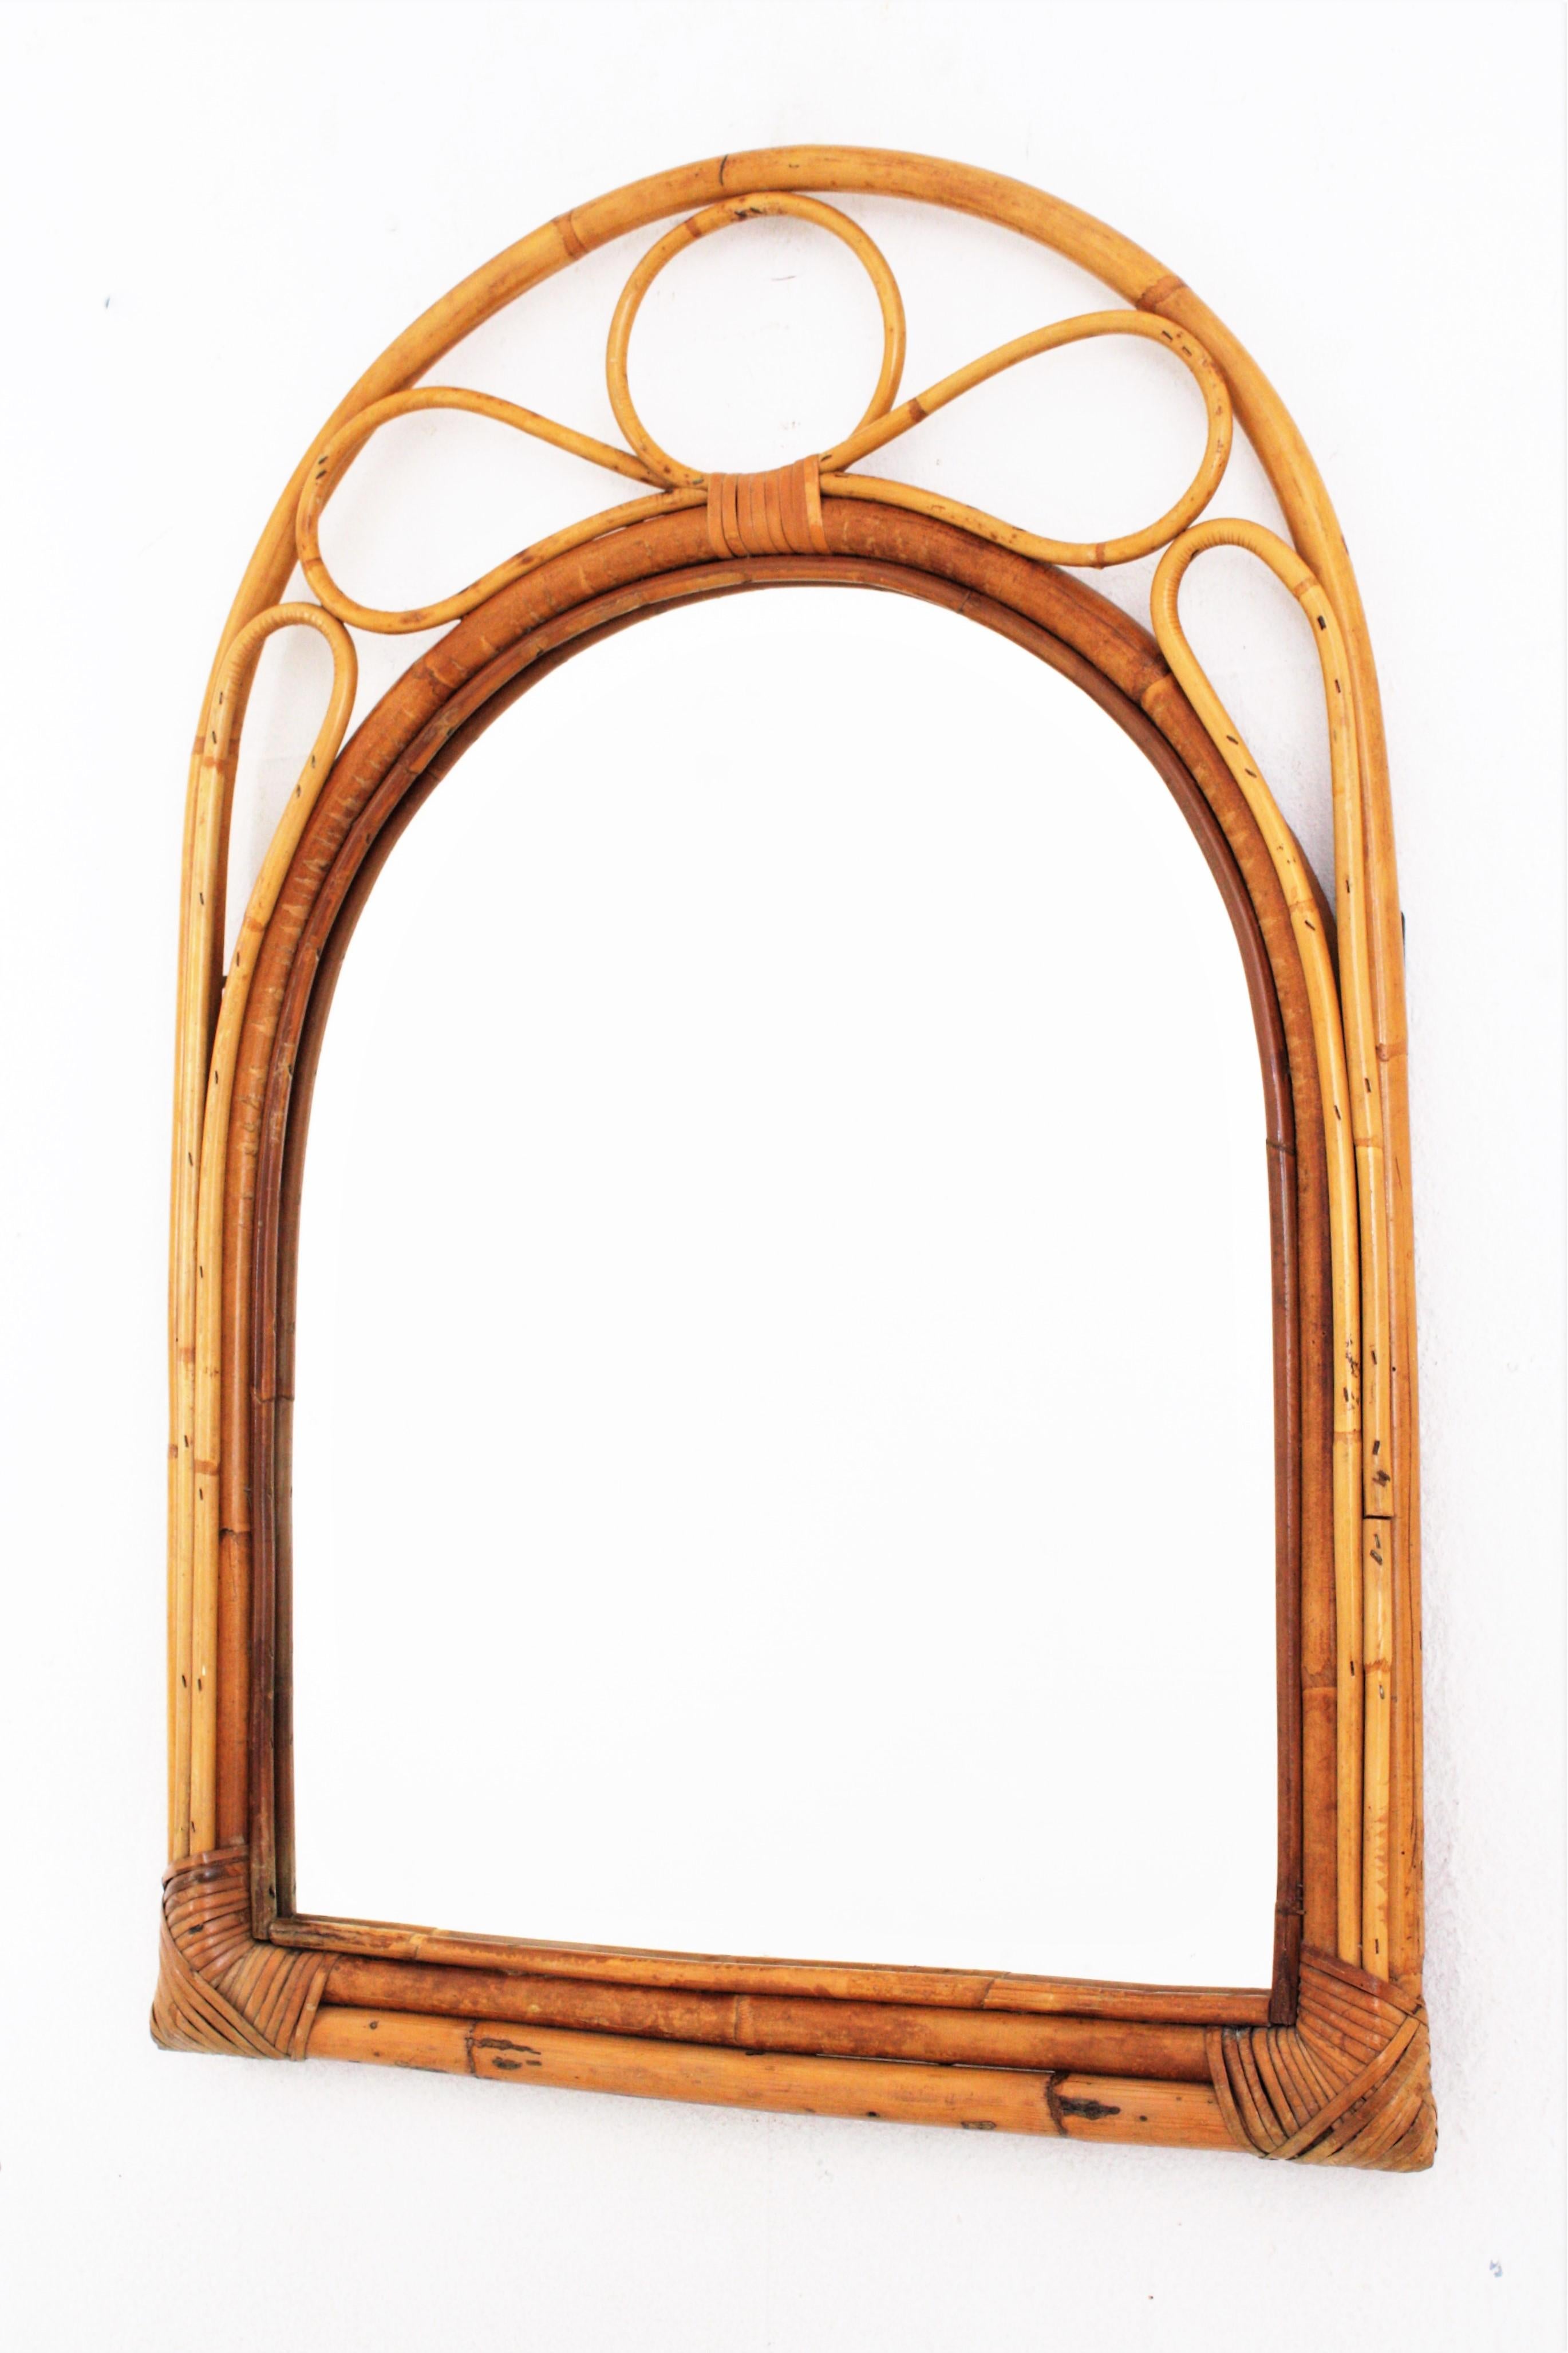 Spanish Bamboo Rattan Arched Wall Mirror, 1960s For Sale 1